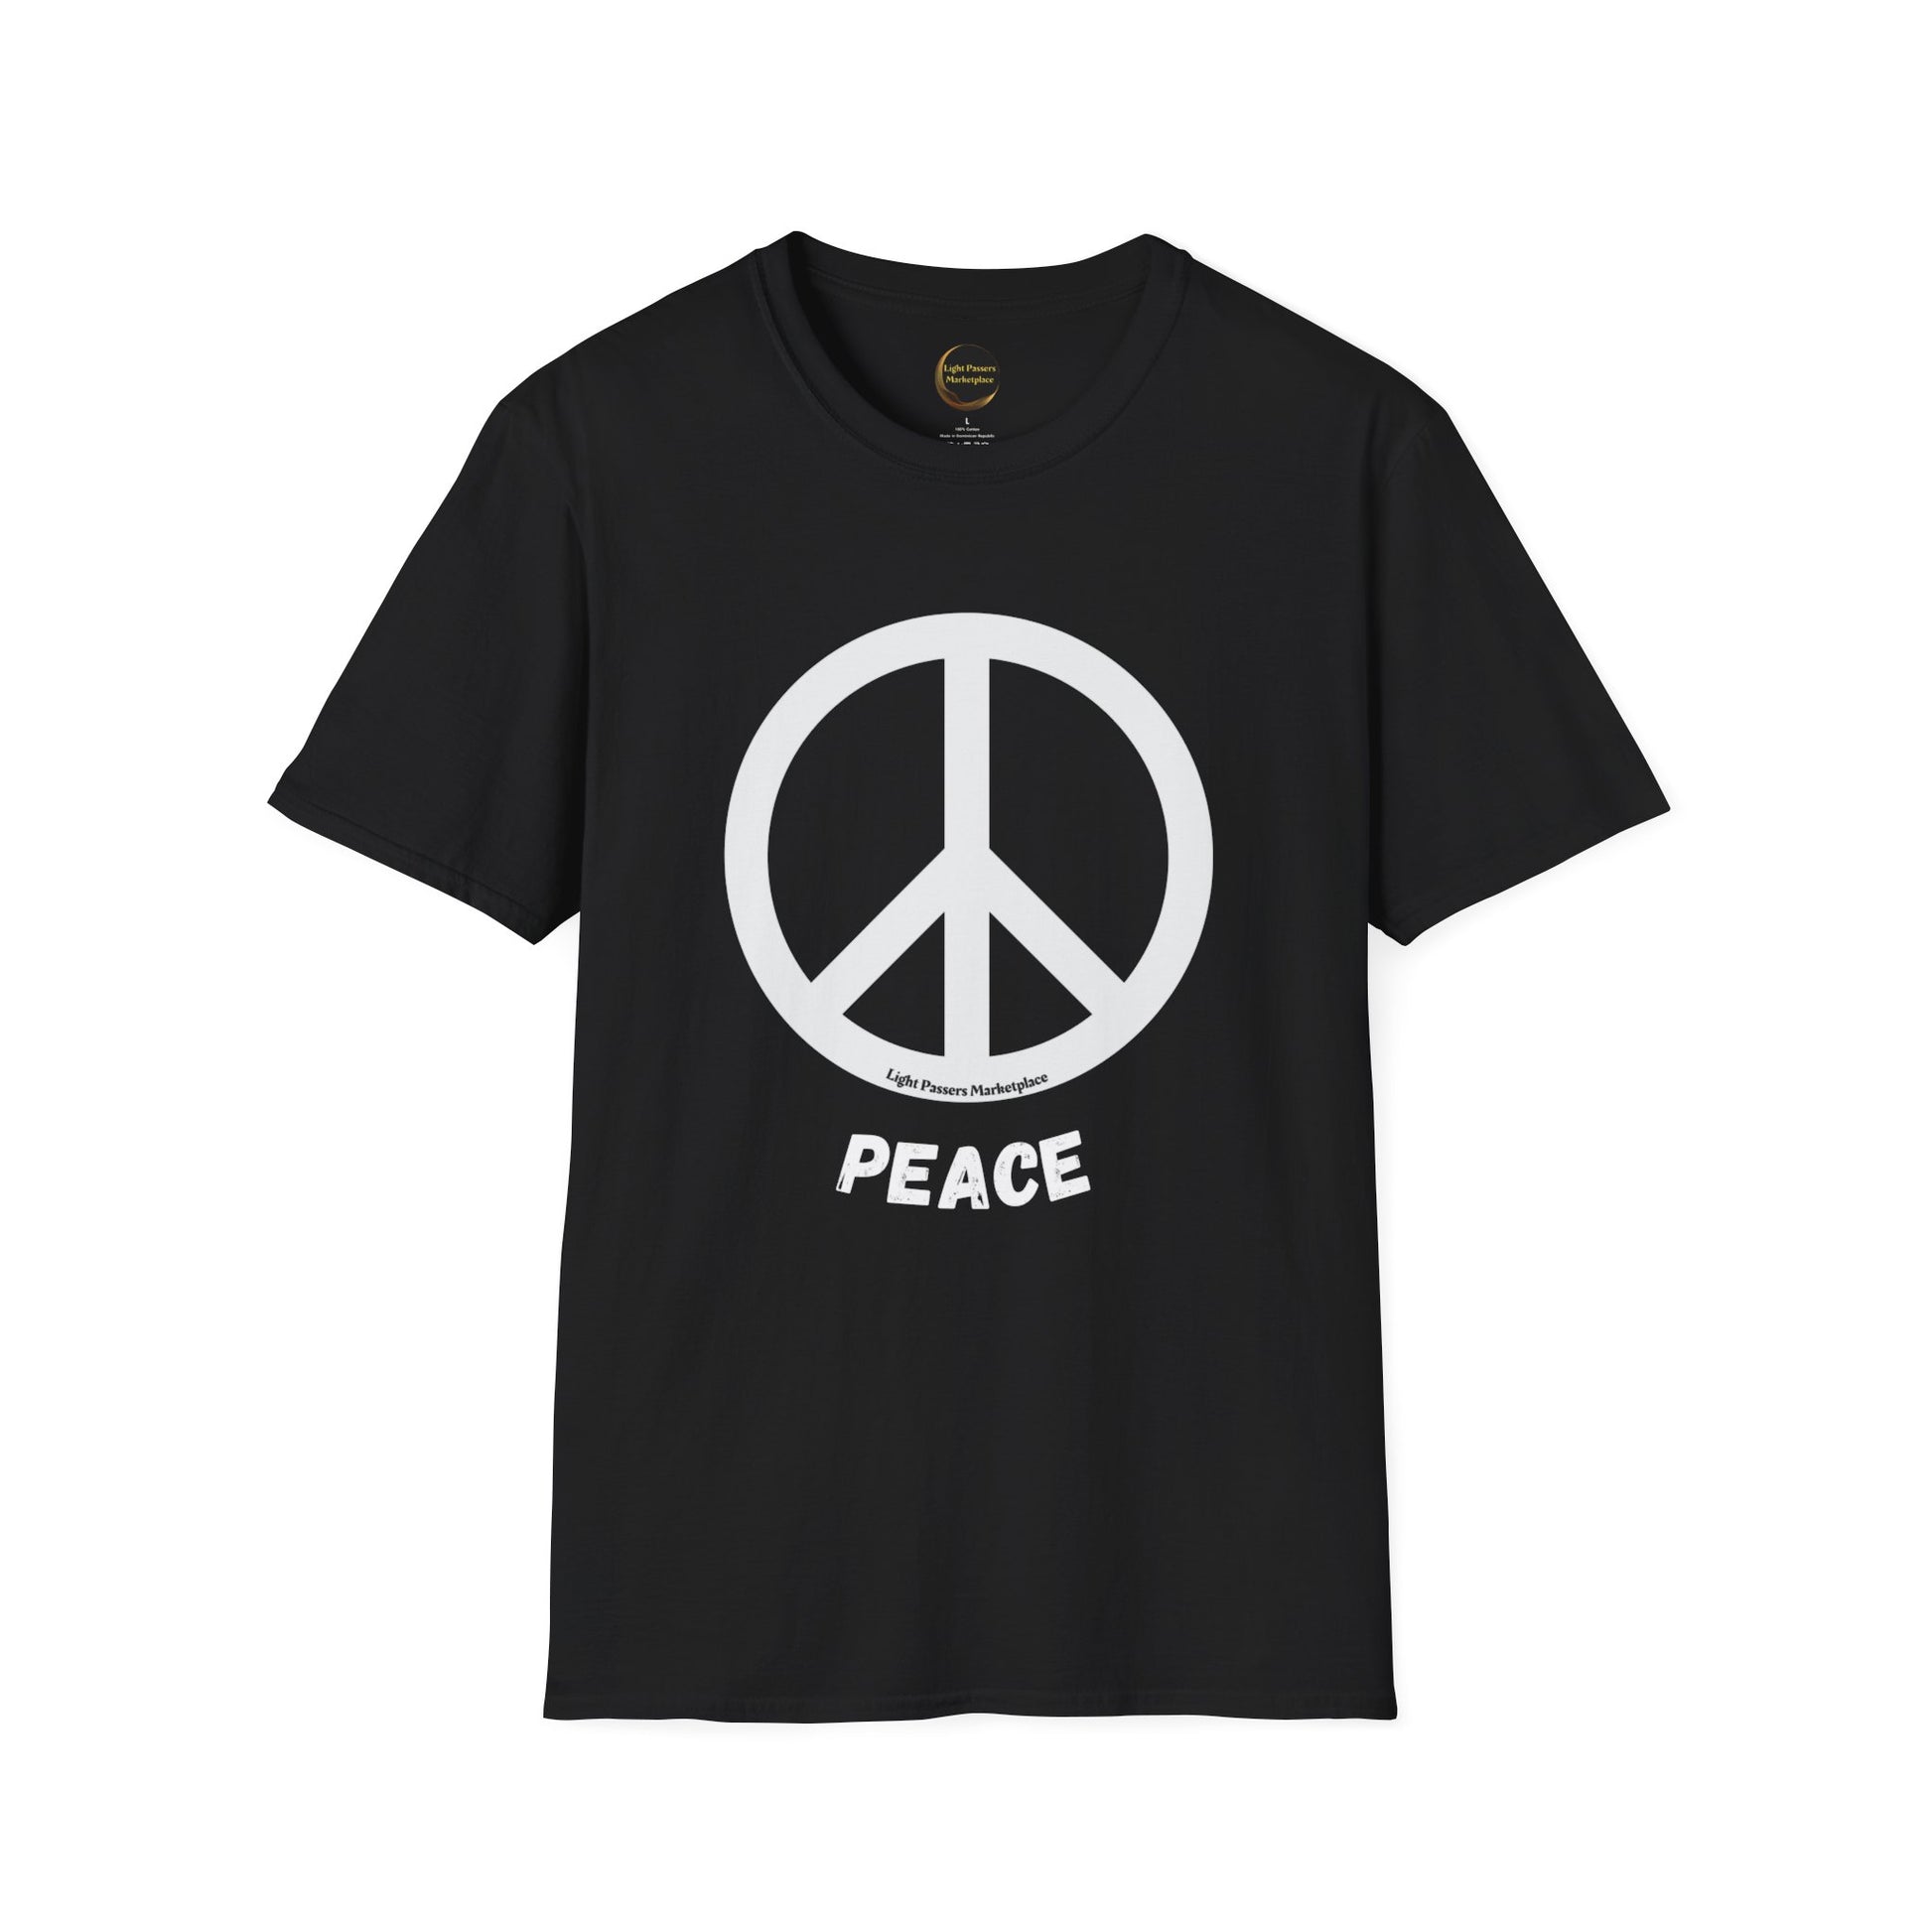 A black unisex t-shirt featuring a peace sign logo. Made from soft 100% cotton, with twill tape shoulders for durability and a ribbed collar. Lightweight and versatile for year-round wear.